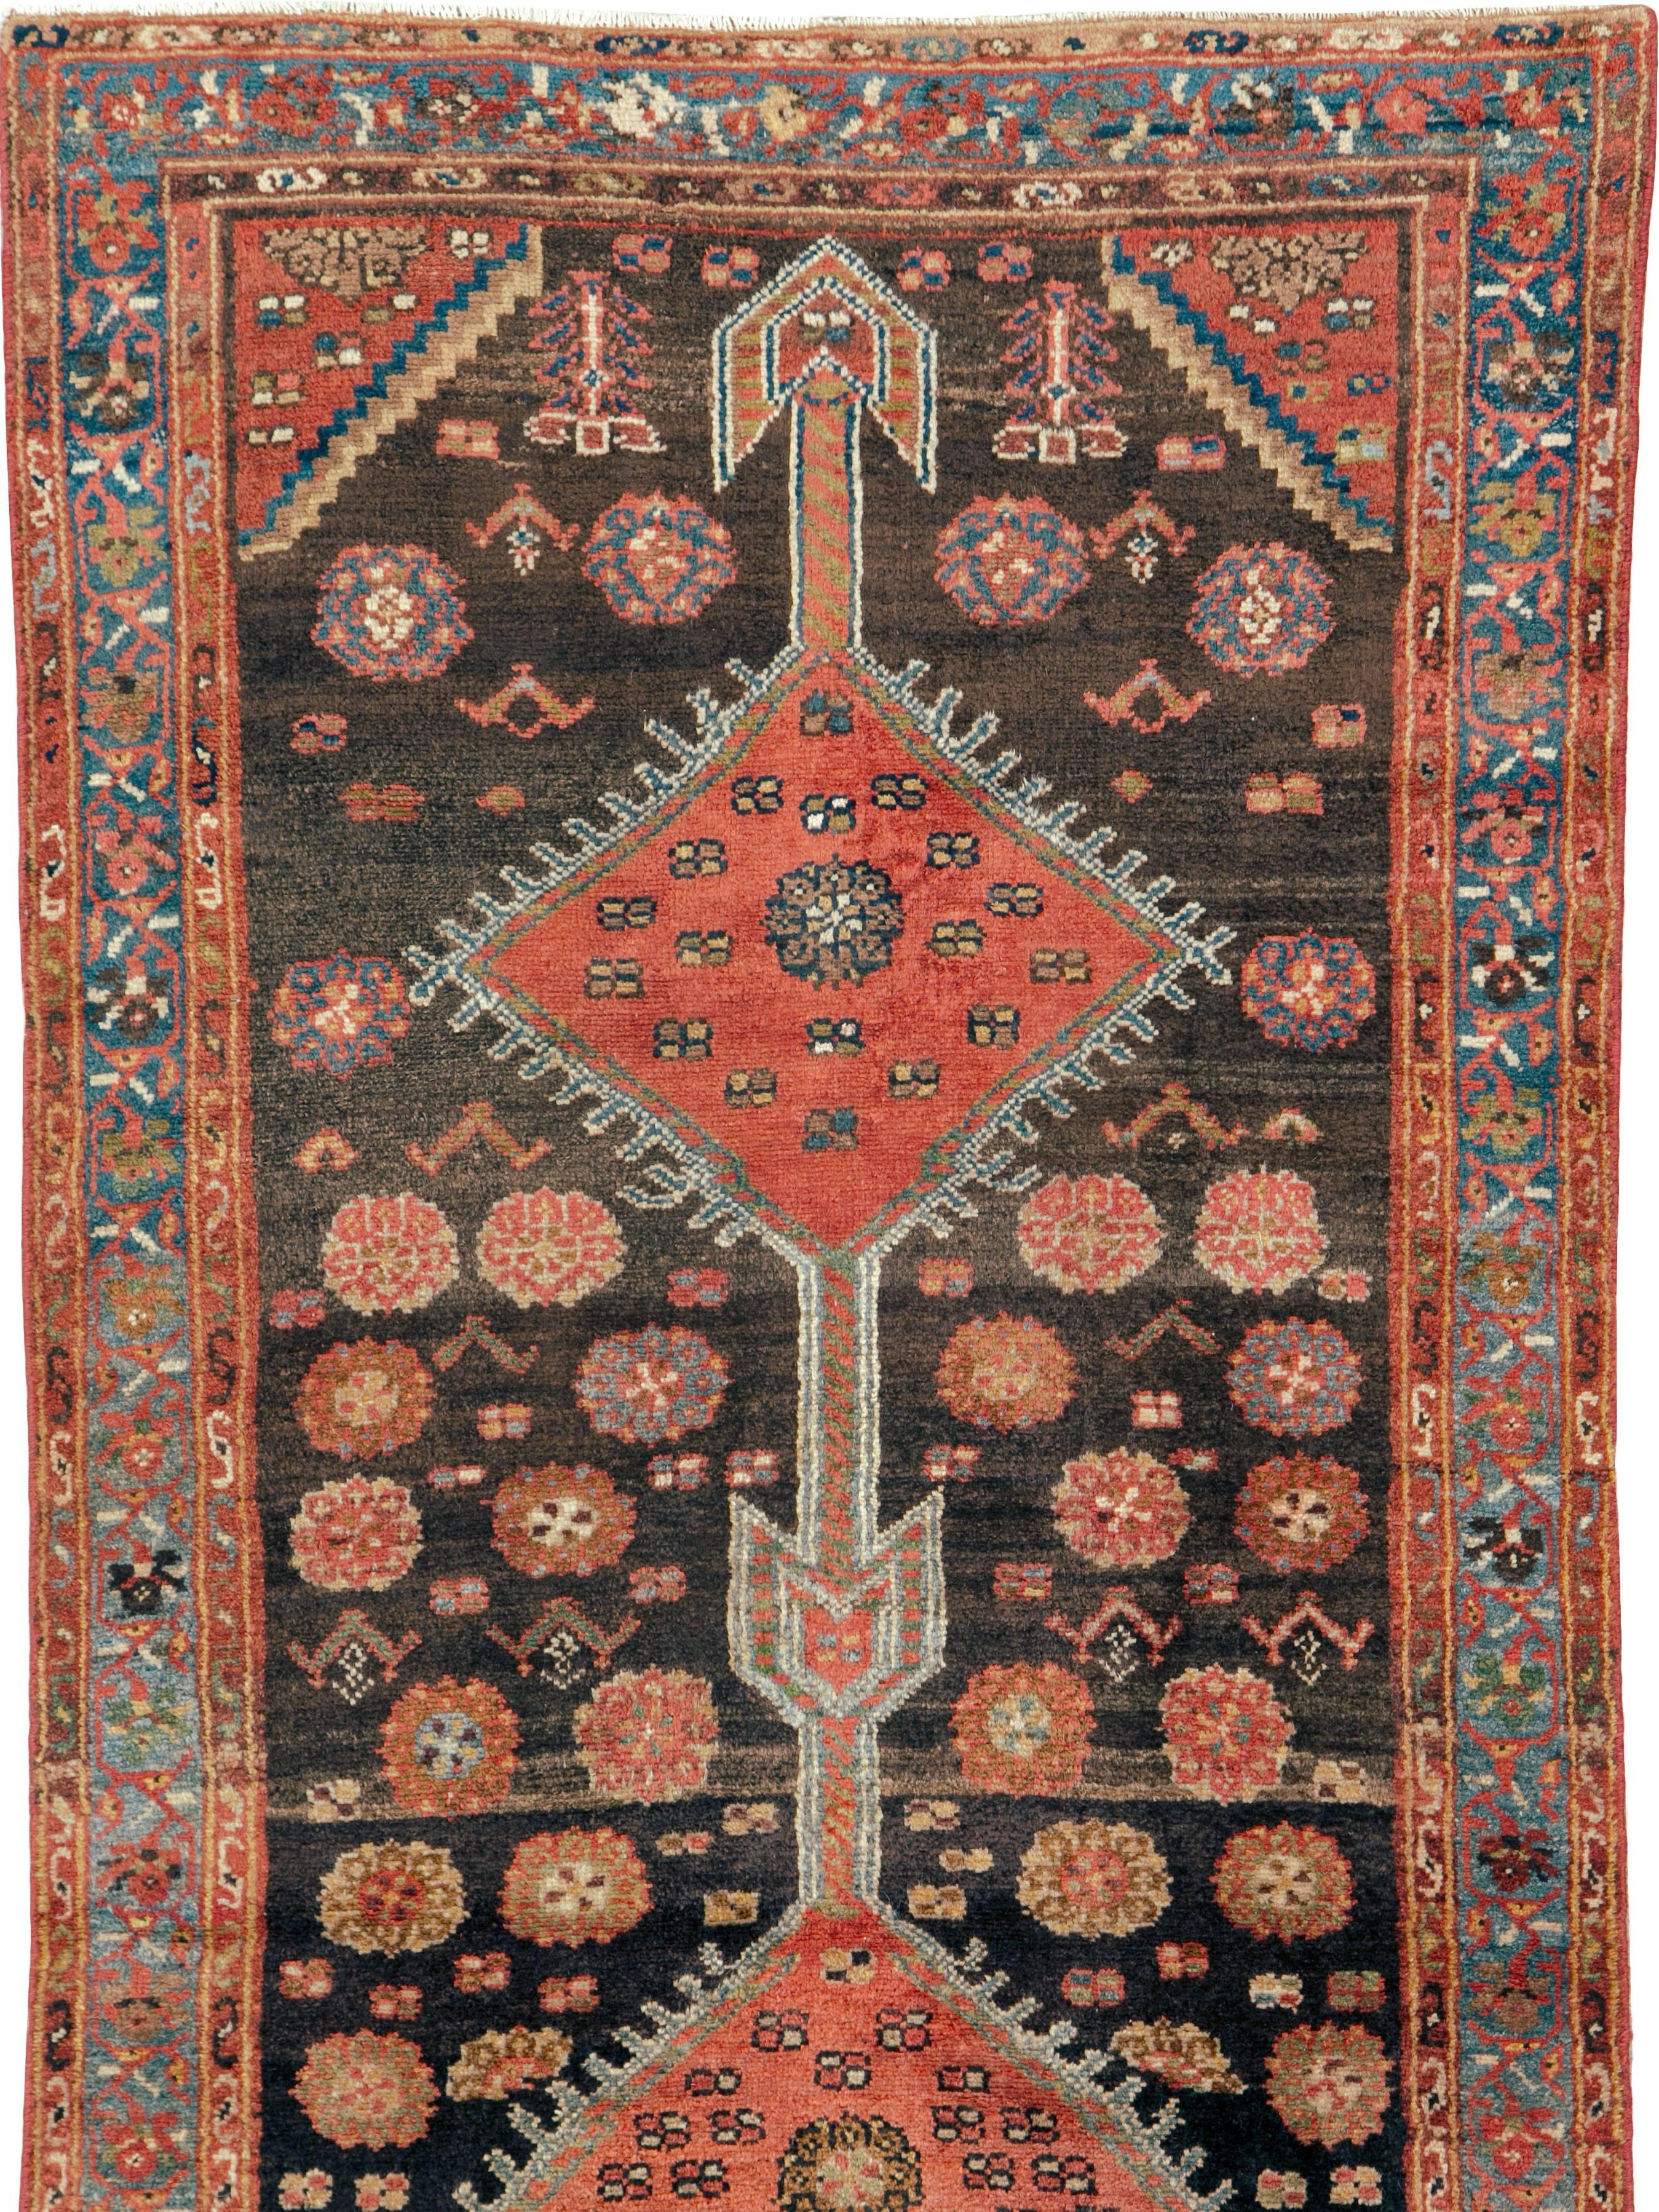 An antique Persian Kurd rug from the early 20th century.